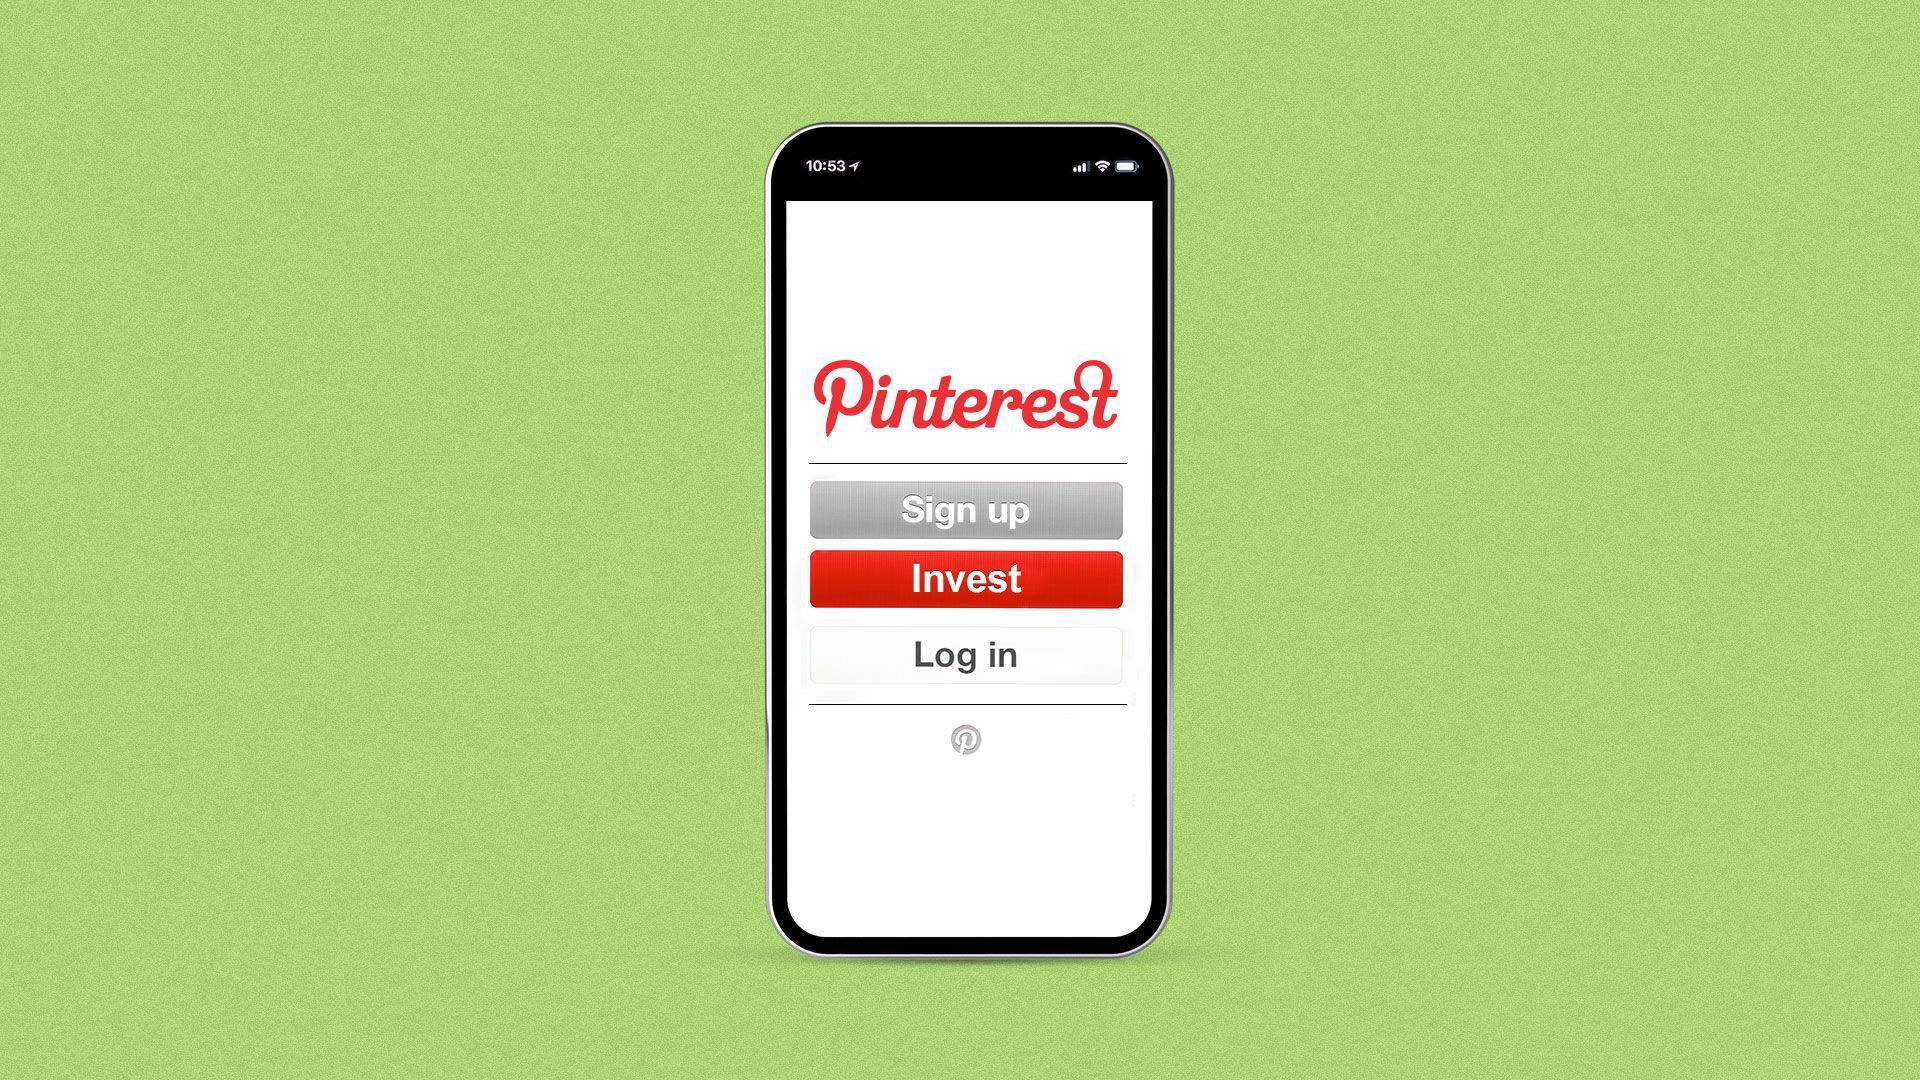 Illustration of the Pinterest logo on an iPhone with an option to click "invest."